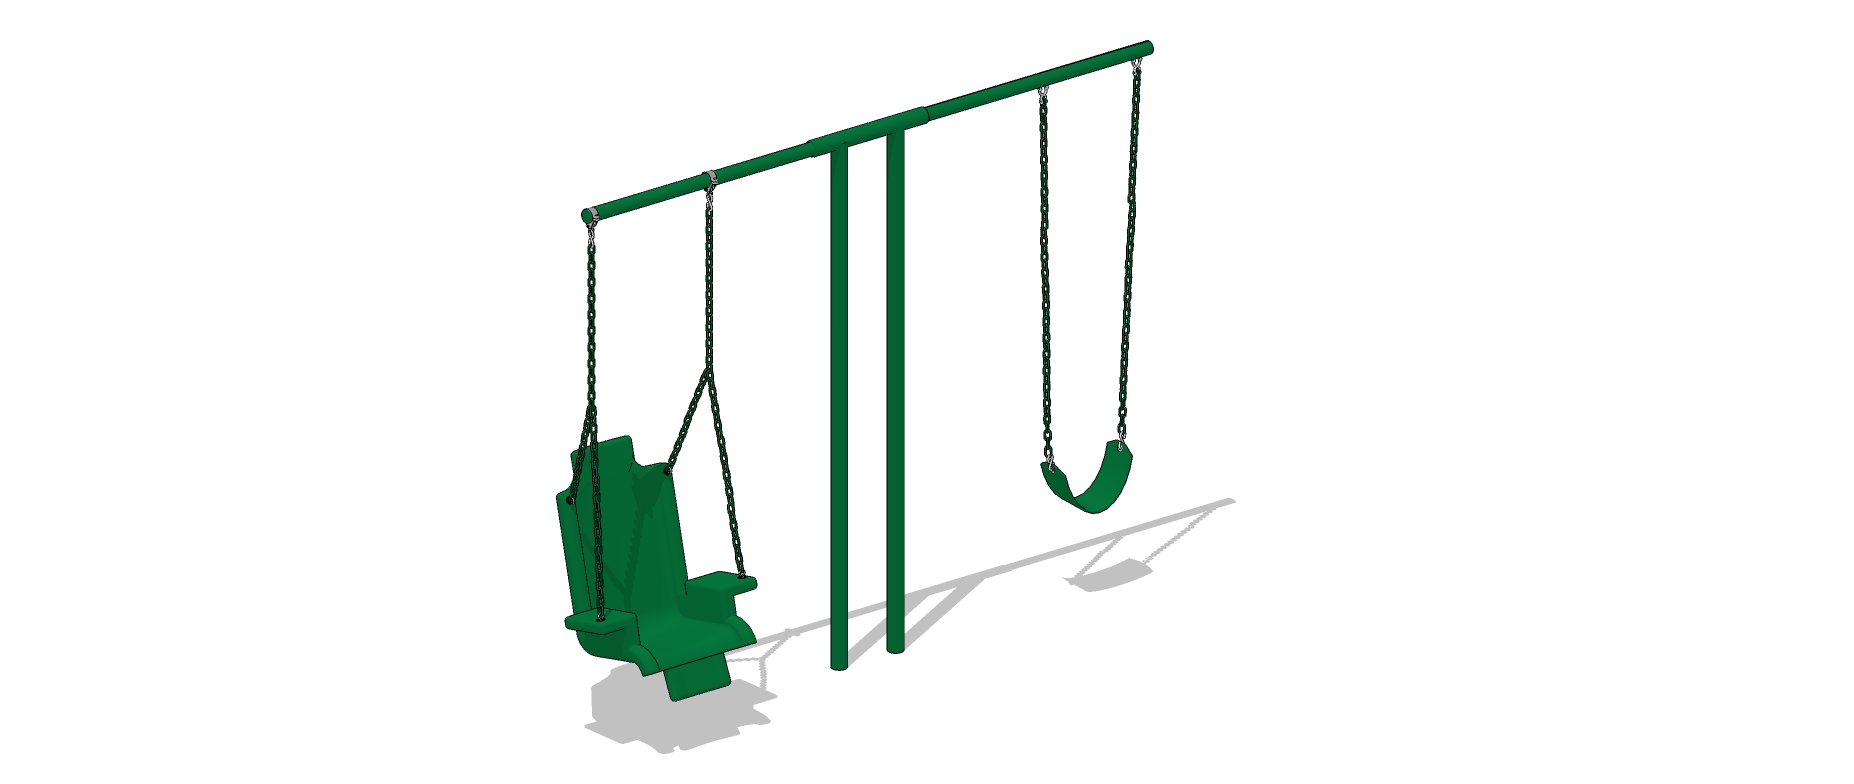 Small Children Swings | Nature of Early Play Playgrounds